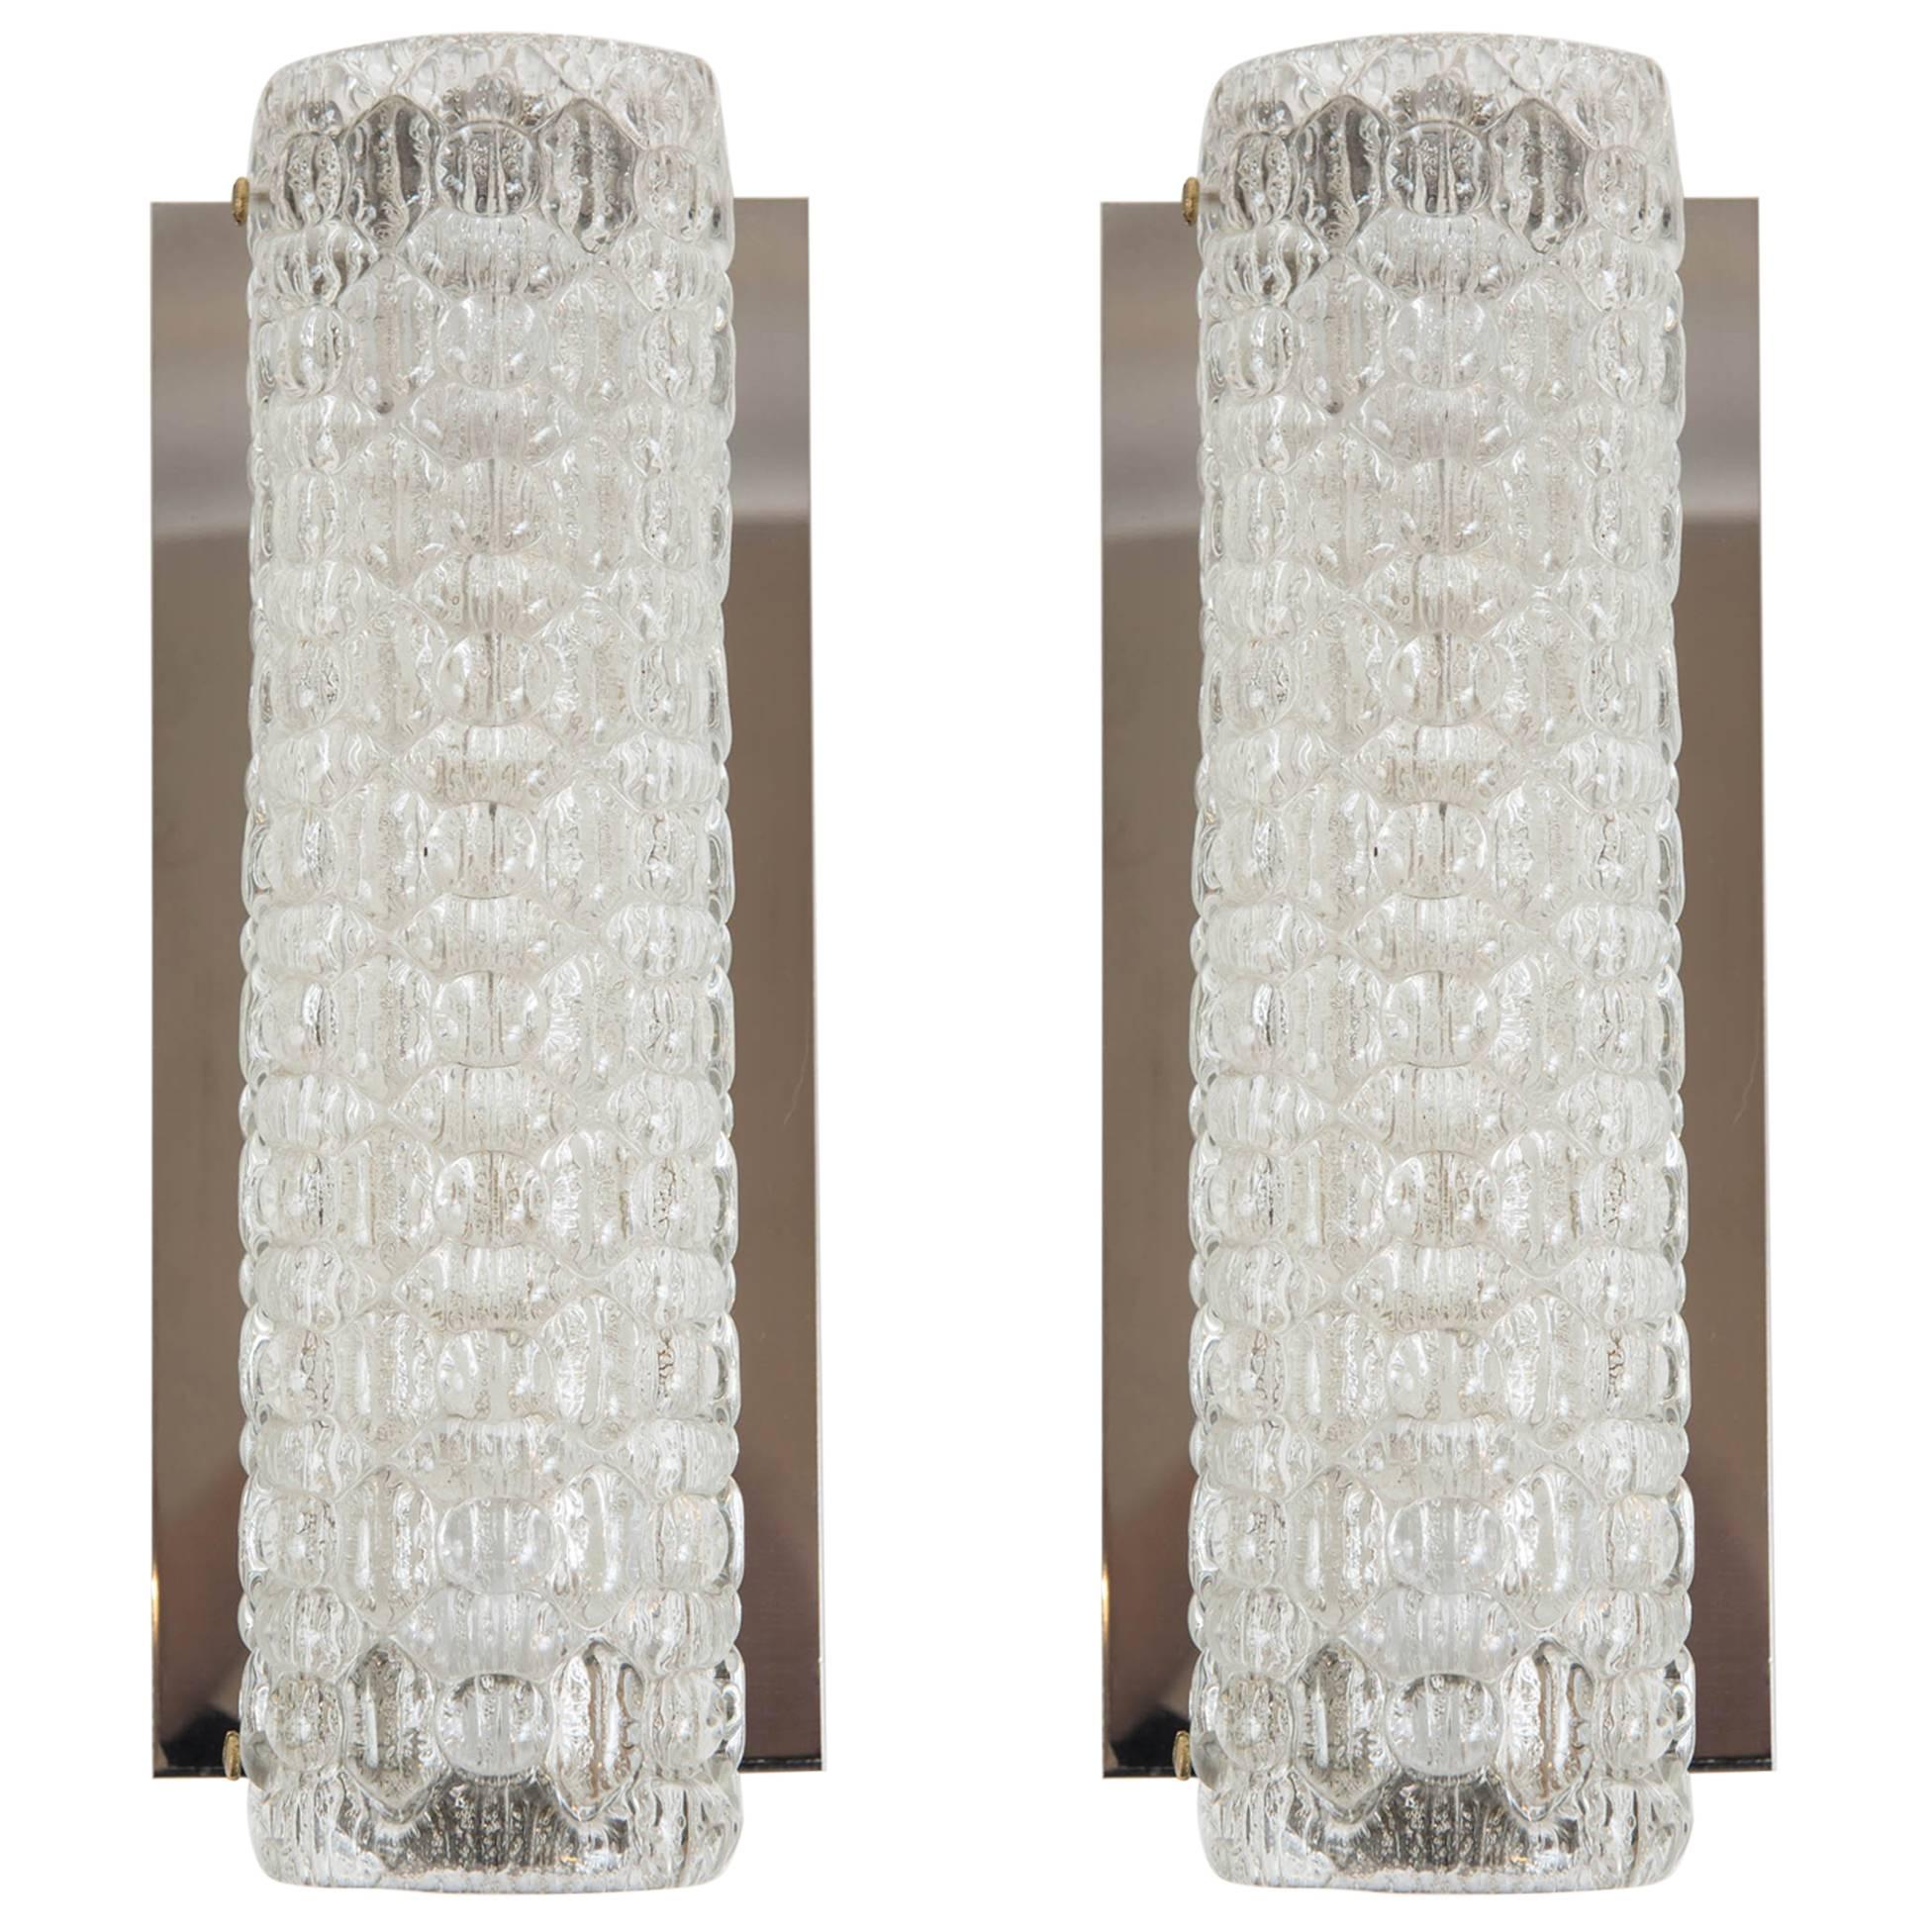 Pair of Vintage Glass Wall Sconces by Hustadt-Leuchten of Germany